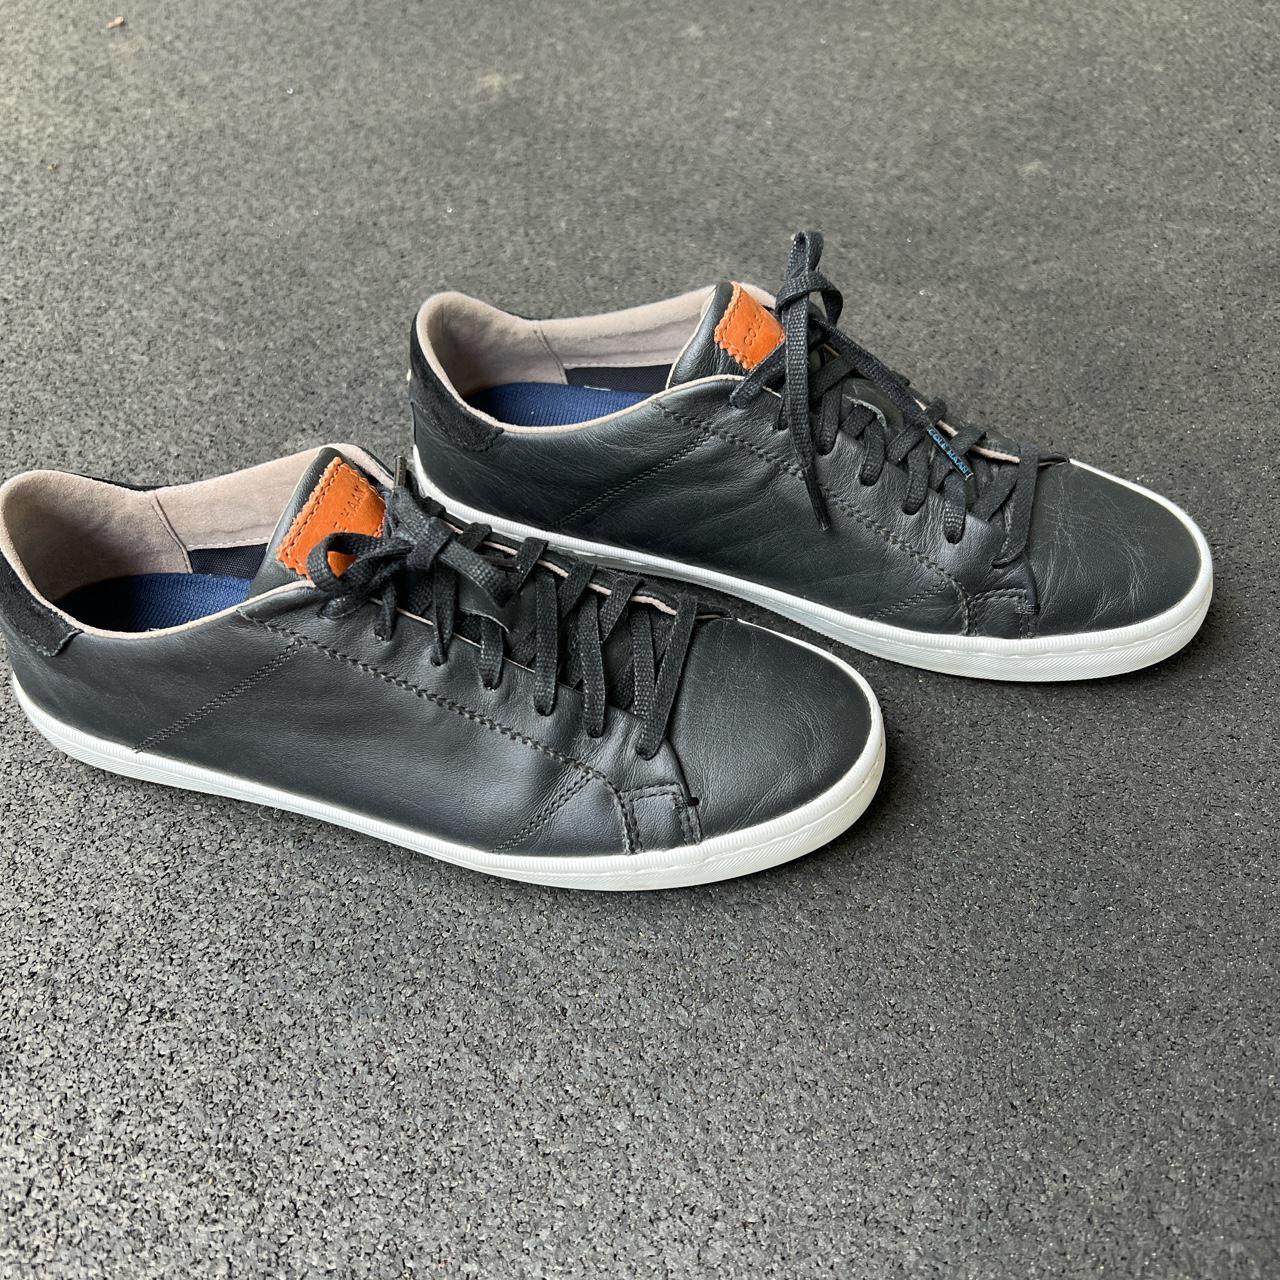 Product Image 3 - Cole Haan lace up sneakers

▫️Size